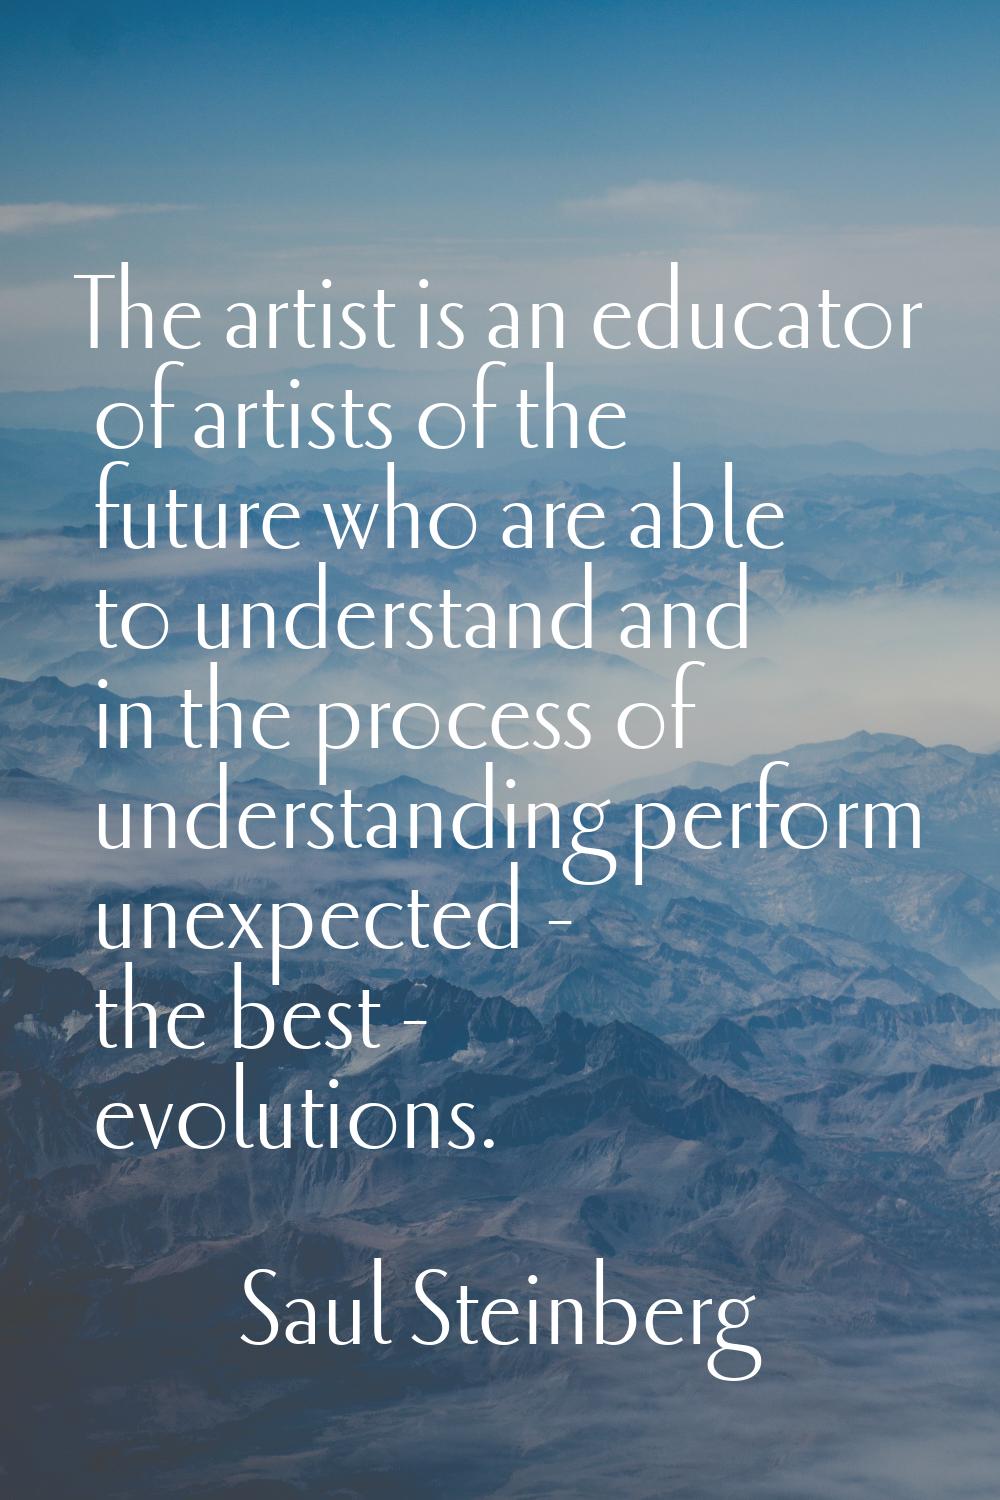 The artist is an educator of artists of the future who are able to understand and in the process of